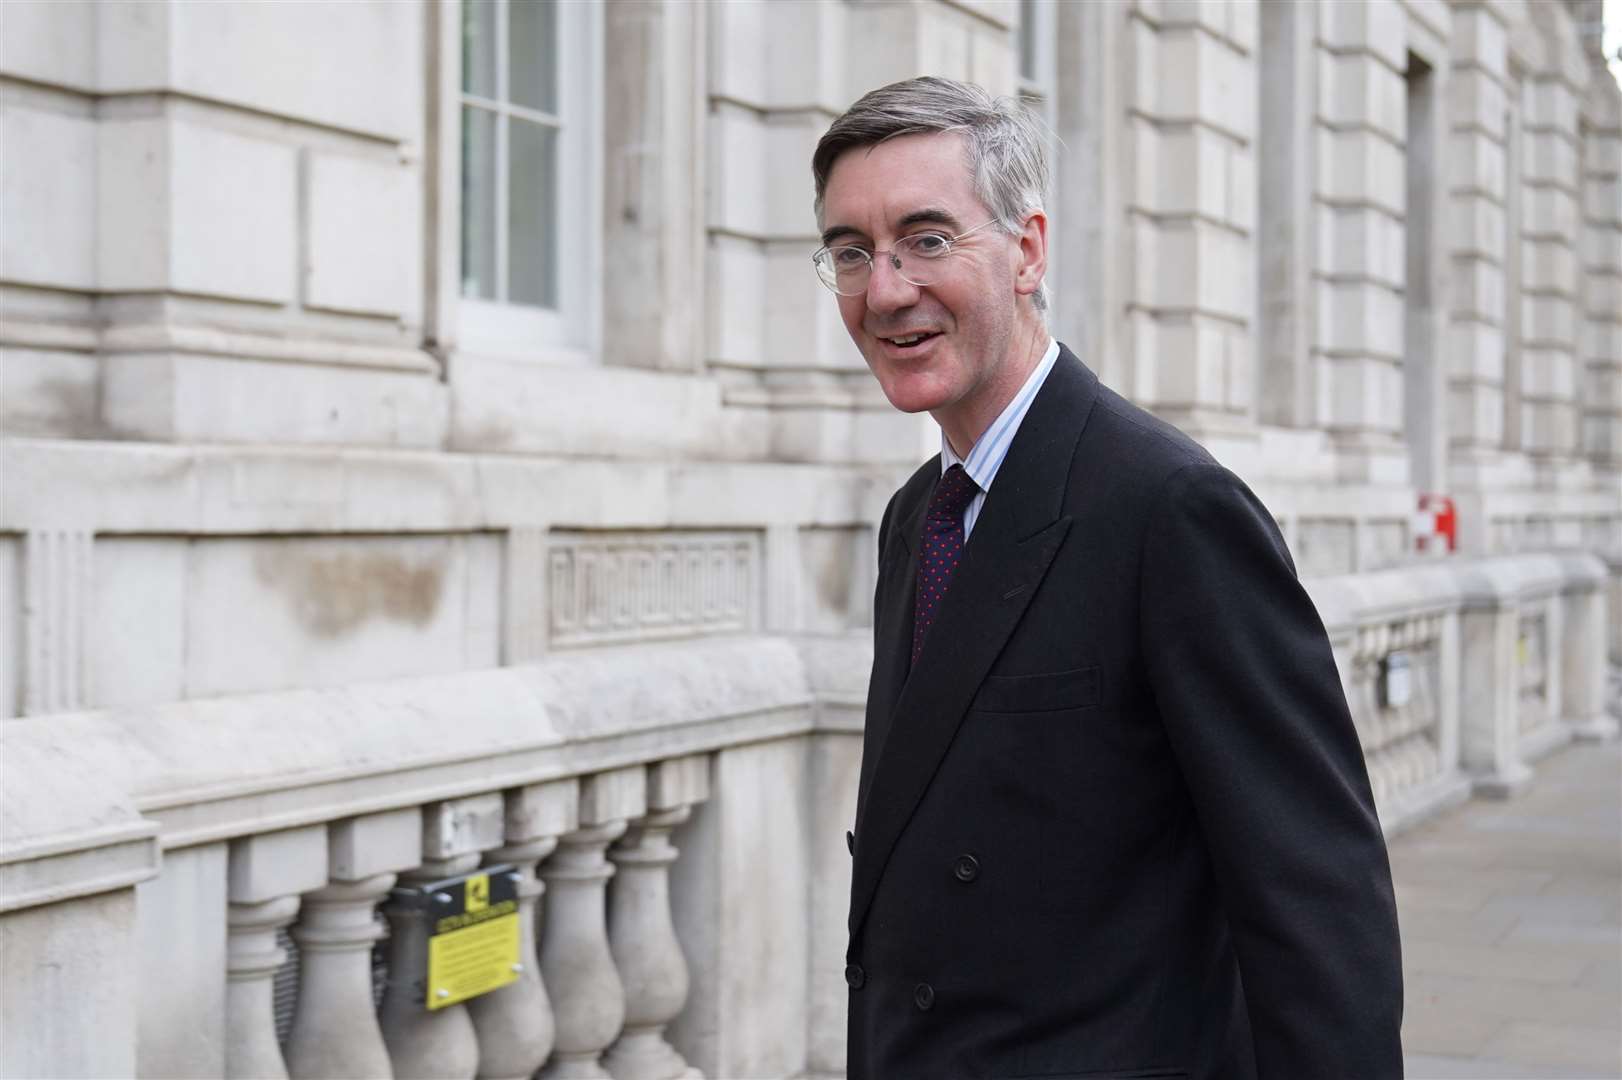 Jacob Rees-Mogg criticised Douglas Ross following the Scottish Tory’s call for Boris Johnson to quit (PA)